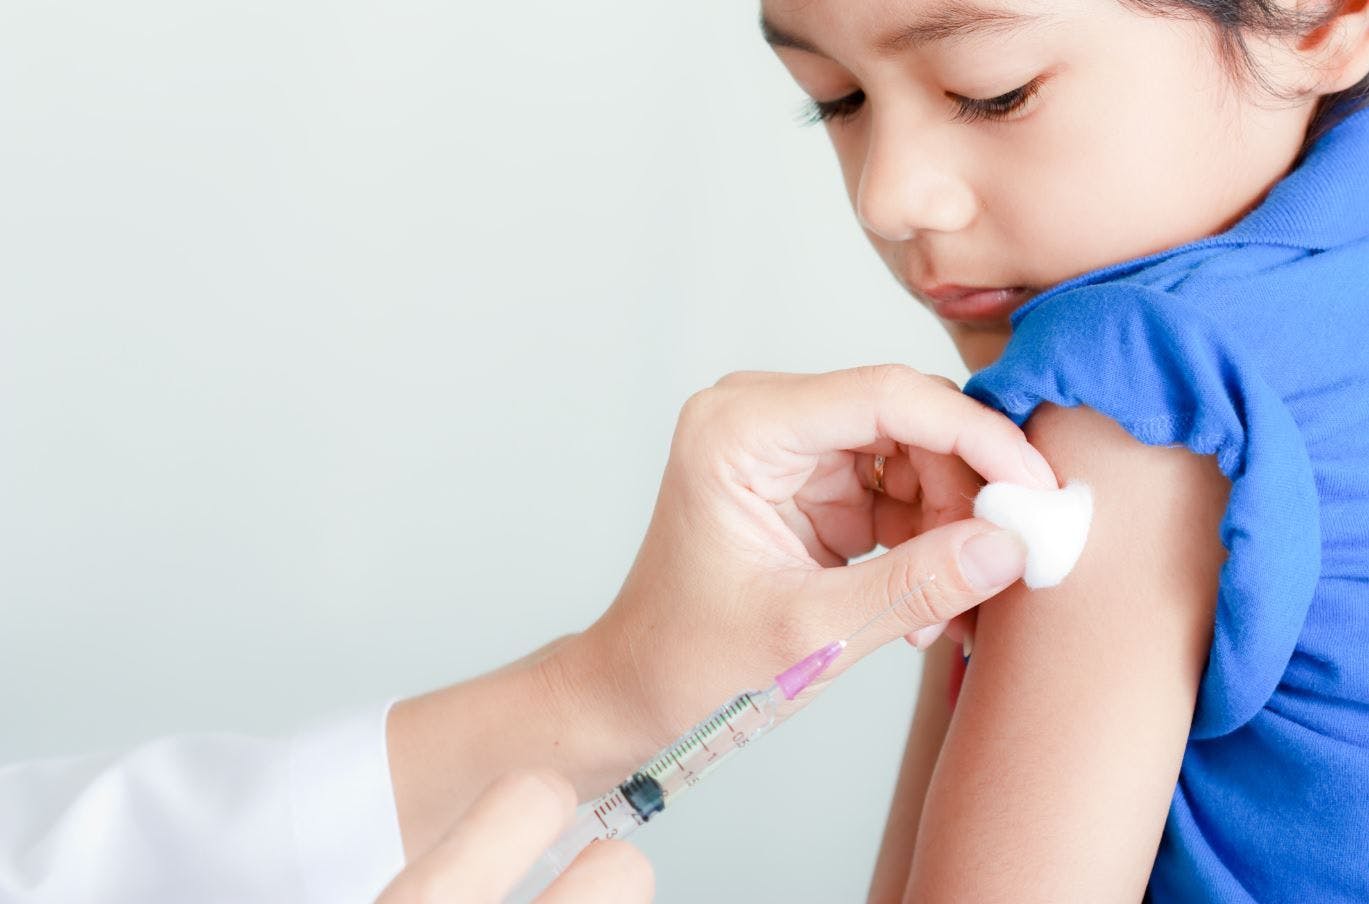 ©Sual Nualpradid/Adobe Stock Flu Vaccination for Children May Reduce Hospitalization for RSV, Suggest New Data